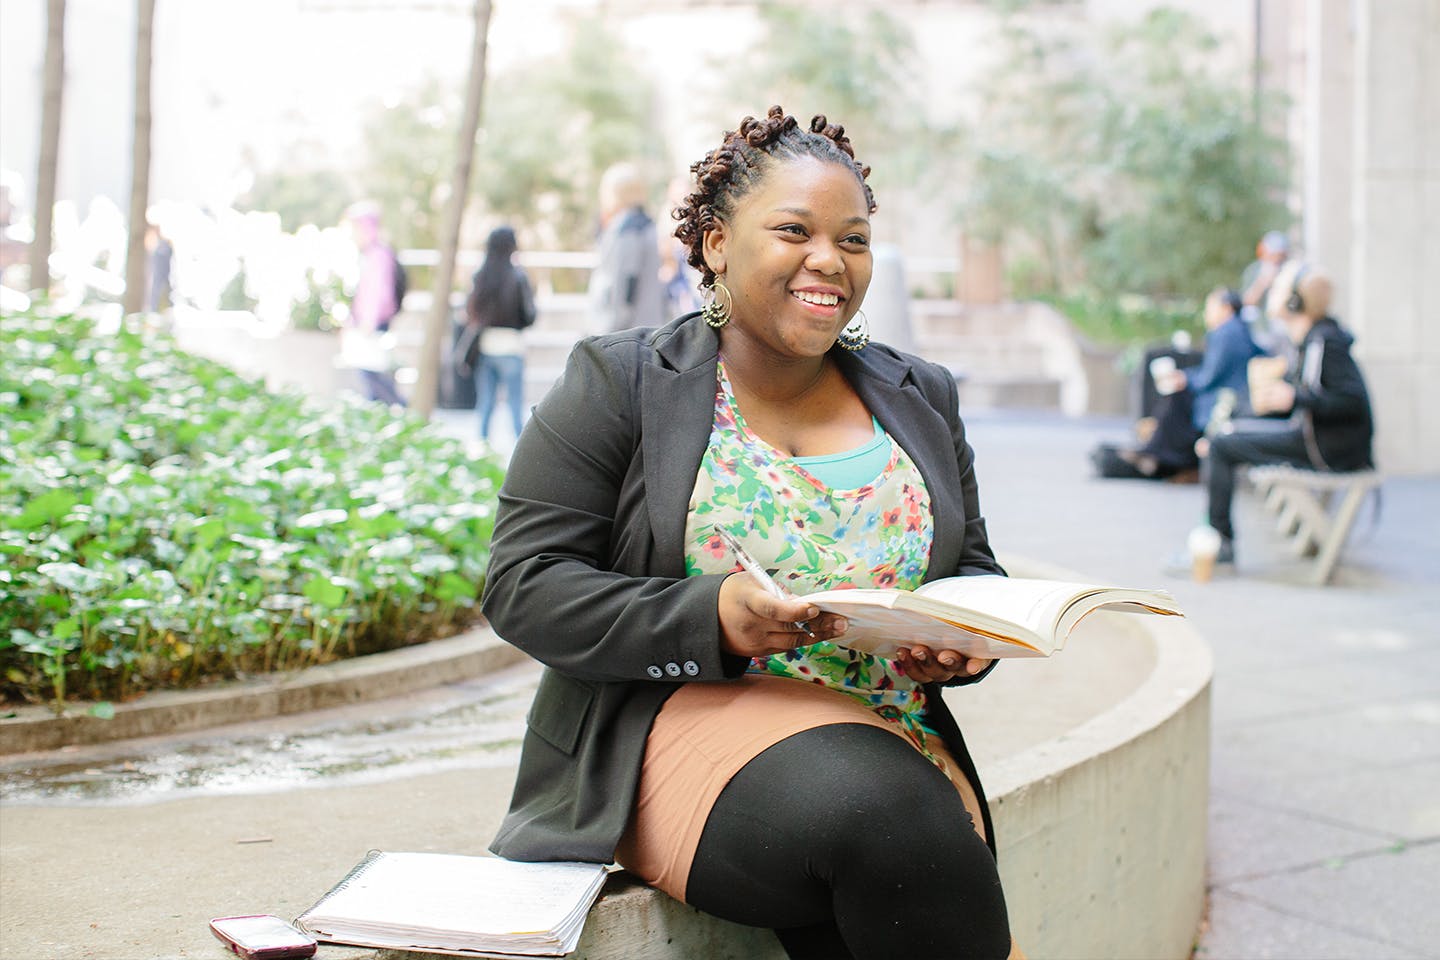 New School student sitting by fountain holding a book smiling